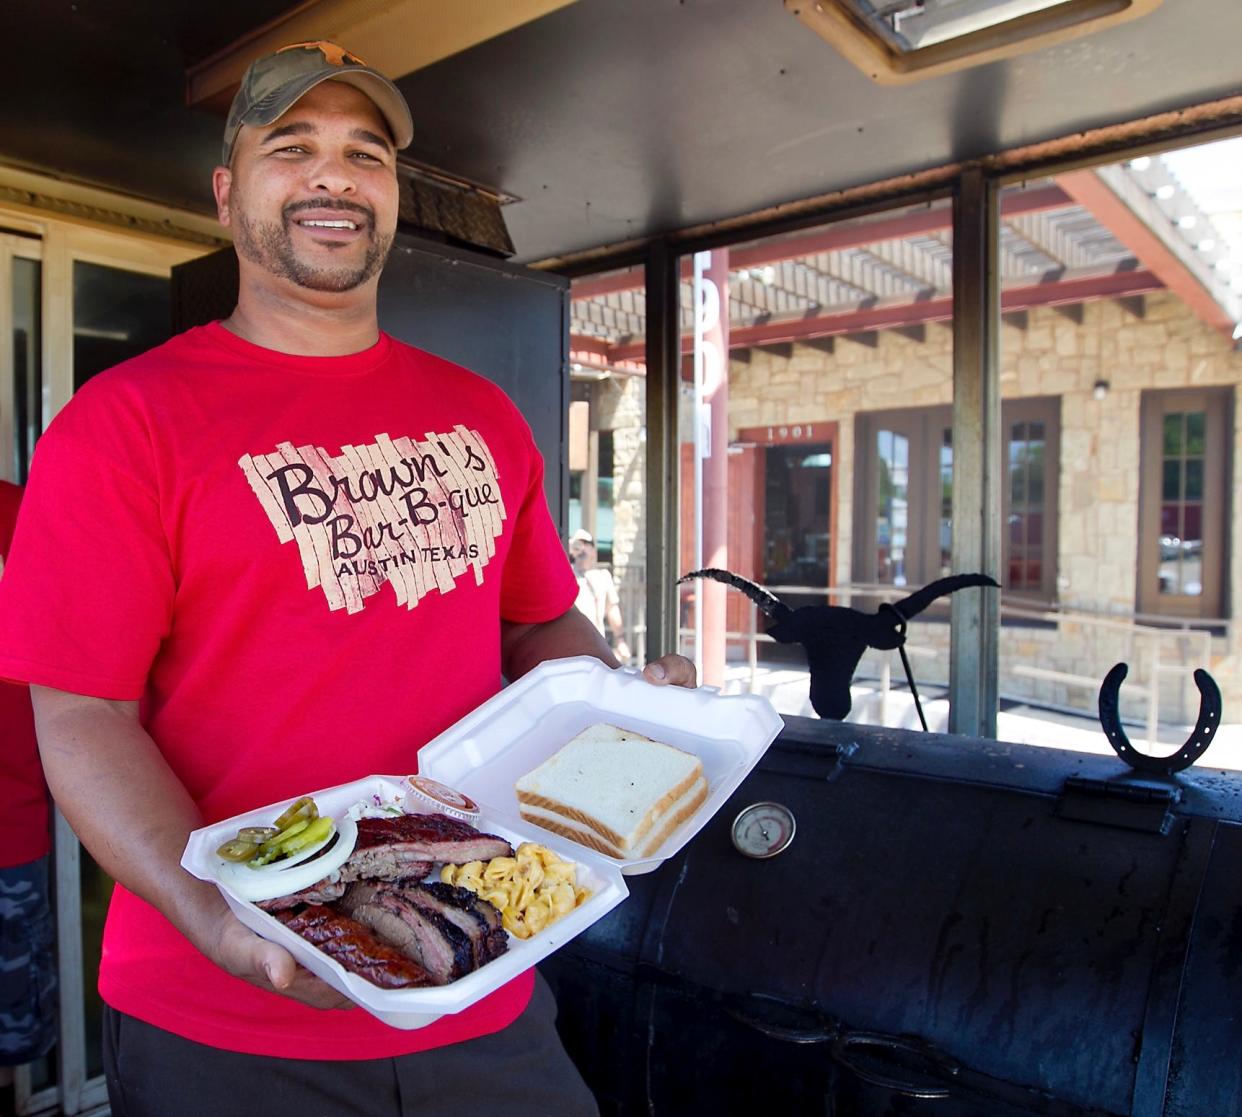 Daniel Brown has been operating his Brown's Bar-B-Que trailer in South Austin for more than a decade.